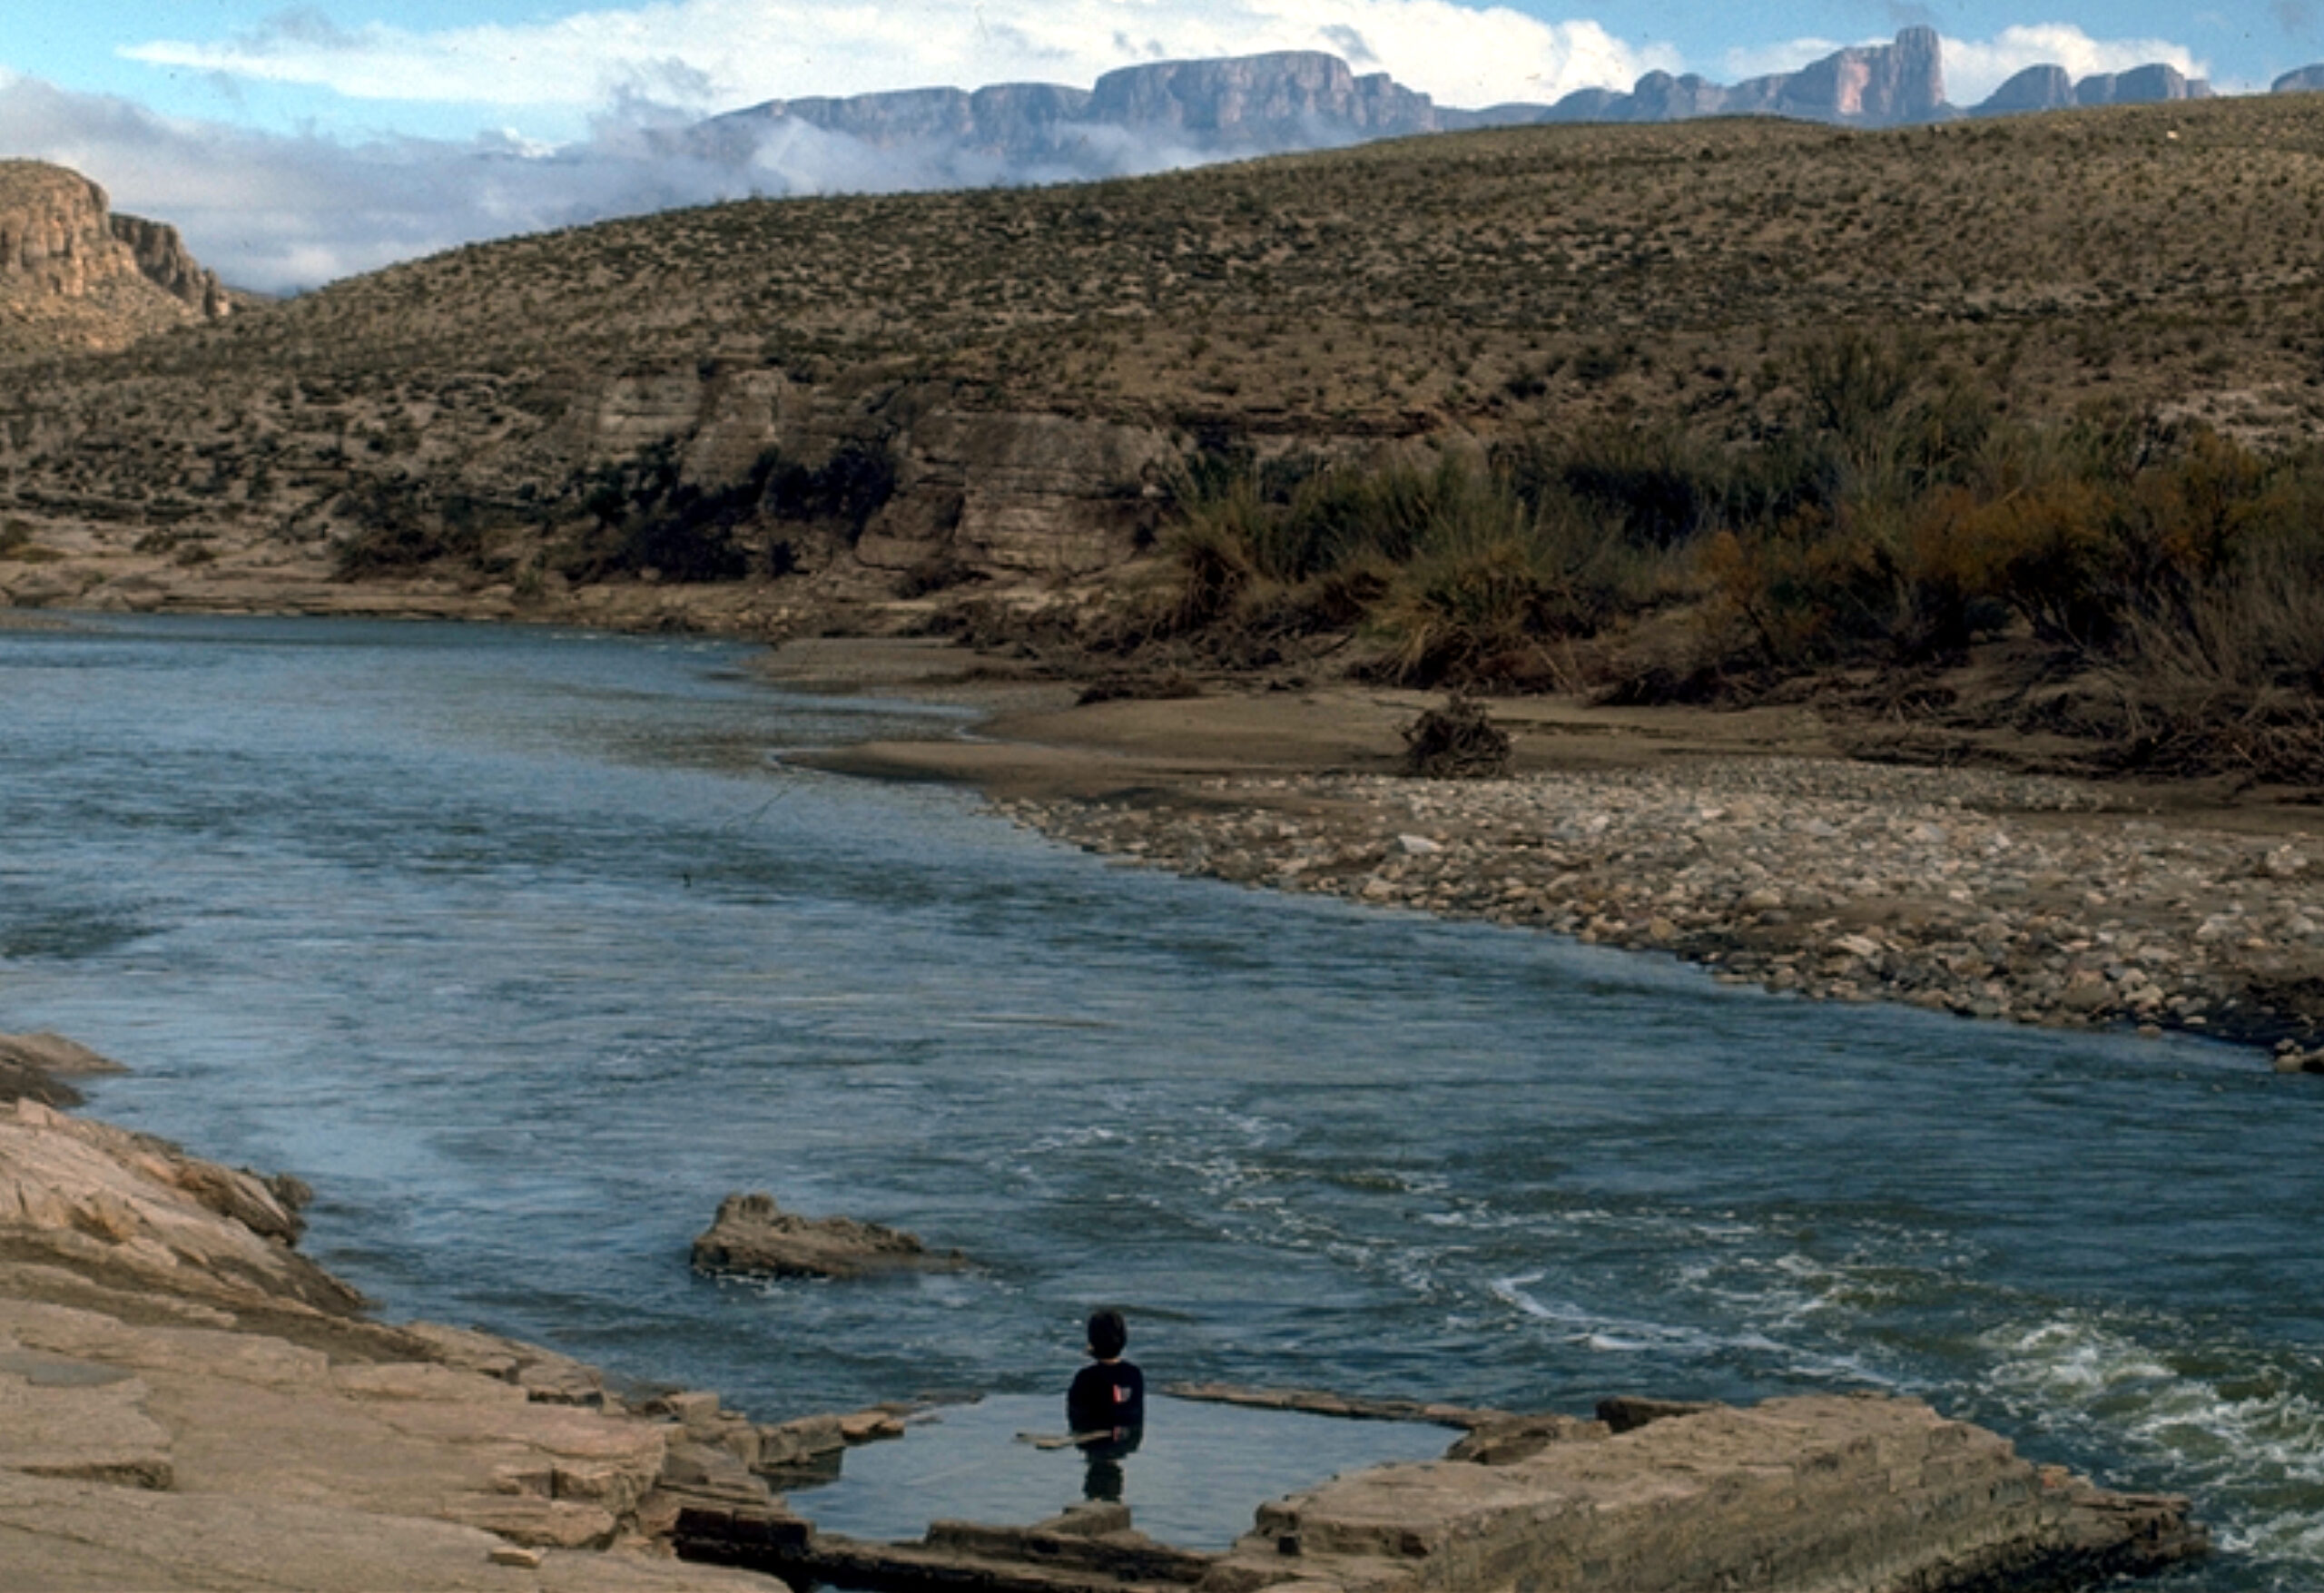 Guest sitting in the water in the ruins of the Hot Springs mineral baths on the Rio Grande river with the Sierra del Carmen mountains in the background